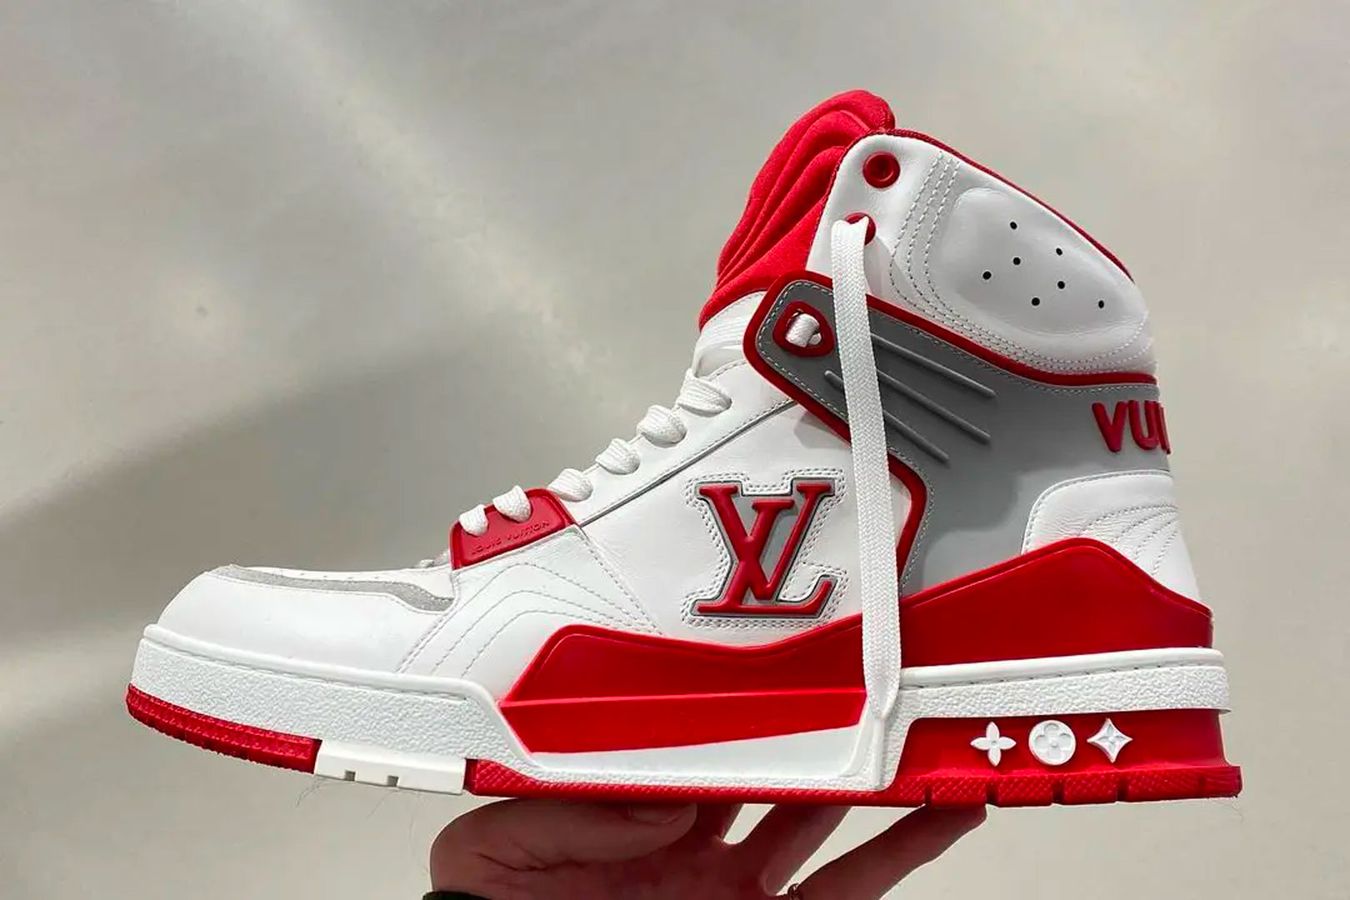 Louis Vuitton LVSK8 product image of a red and white high-top.